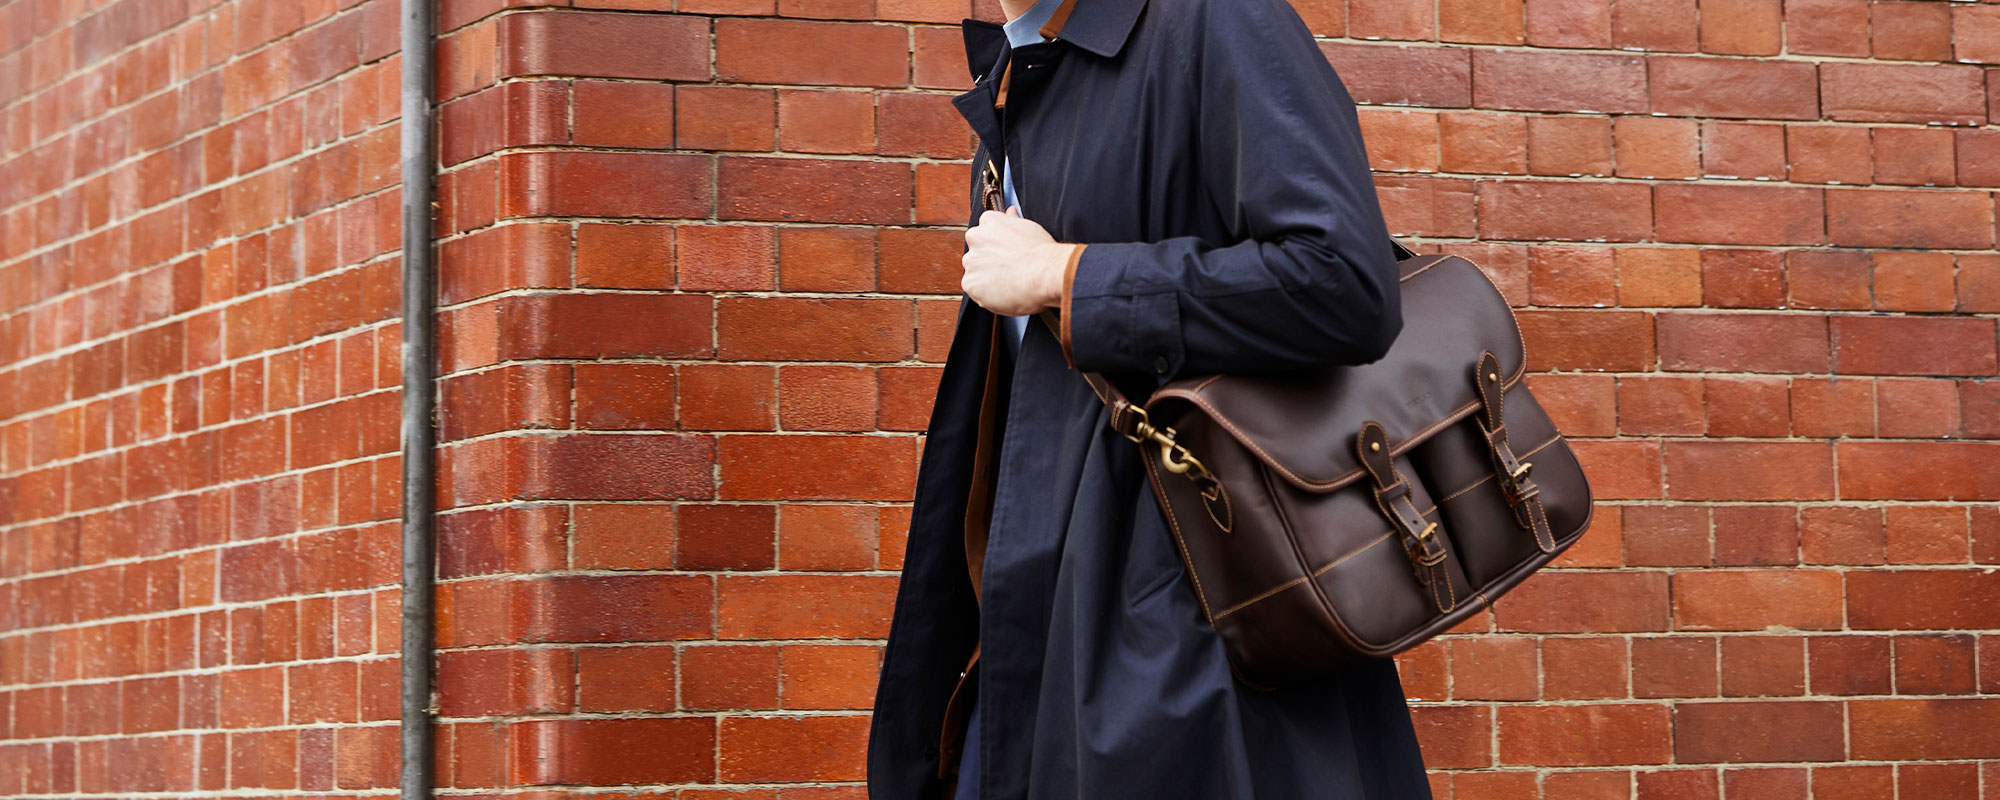 Sundance Floodlight Leather Bags | Made in England by Tusting